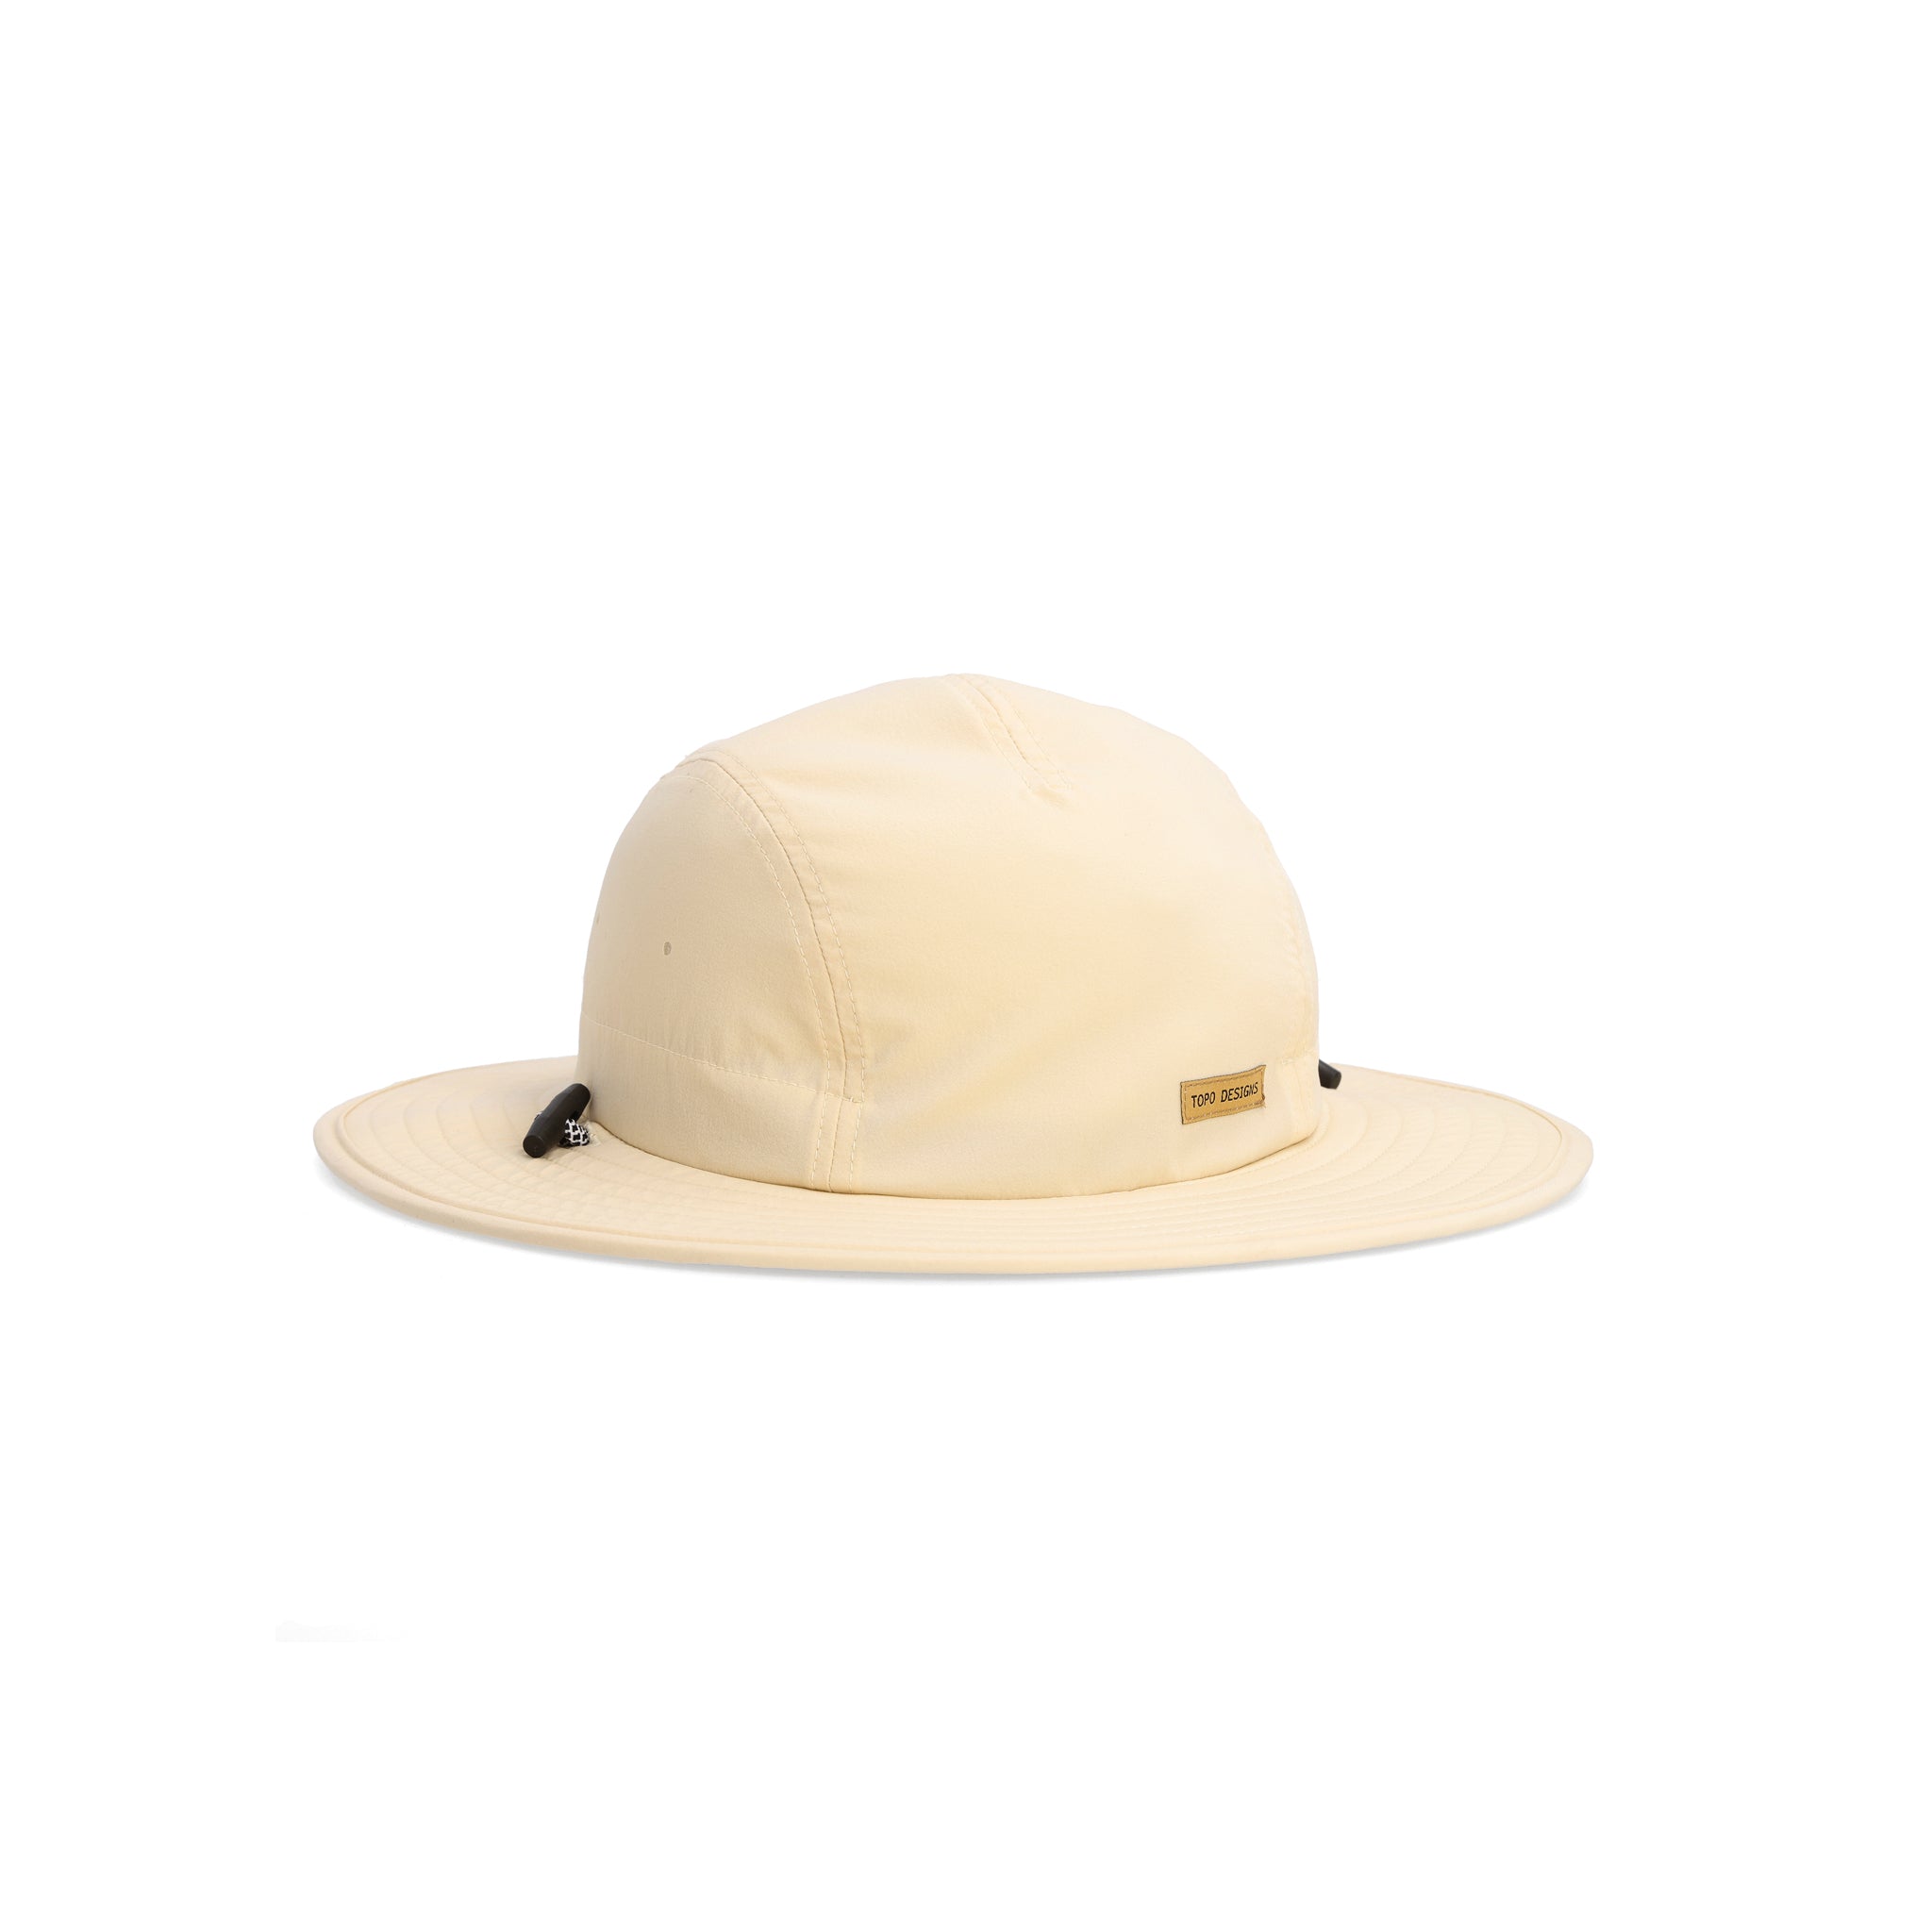 Topo Designs Sun Hat with original logo patch in "Sand".